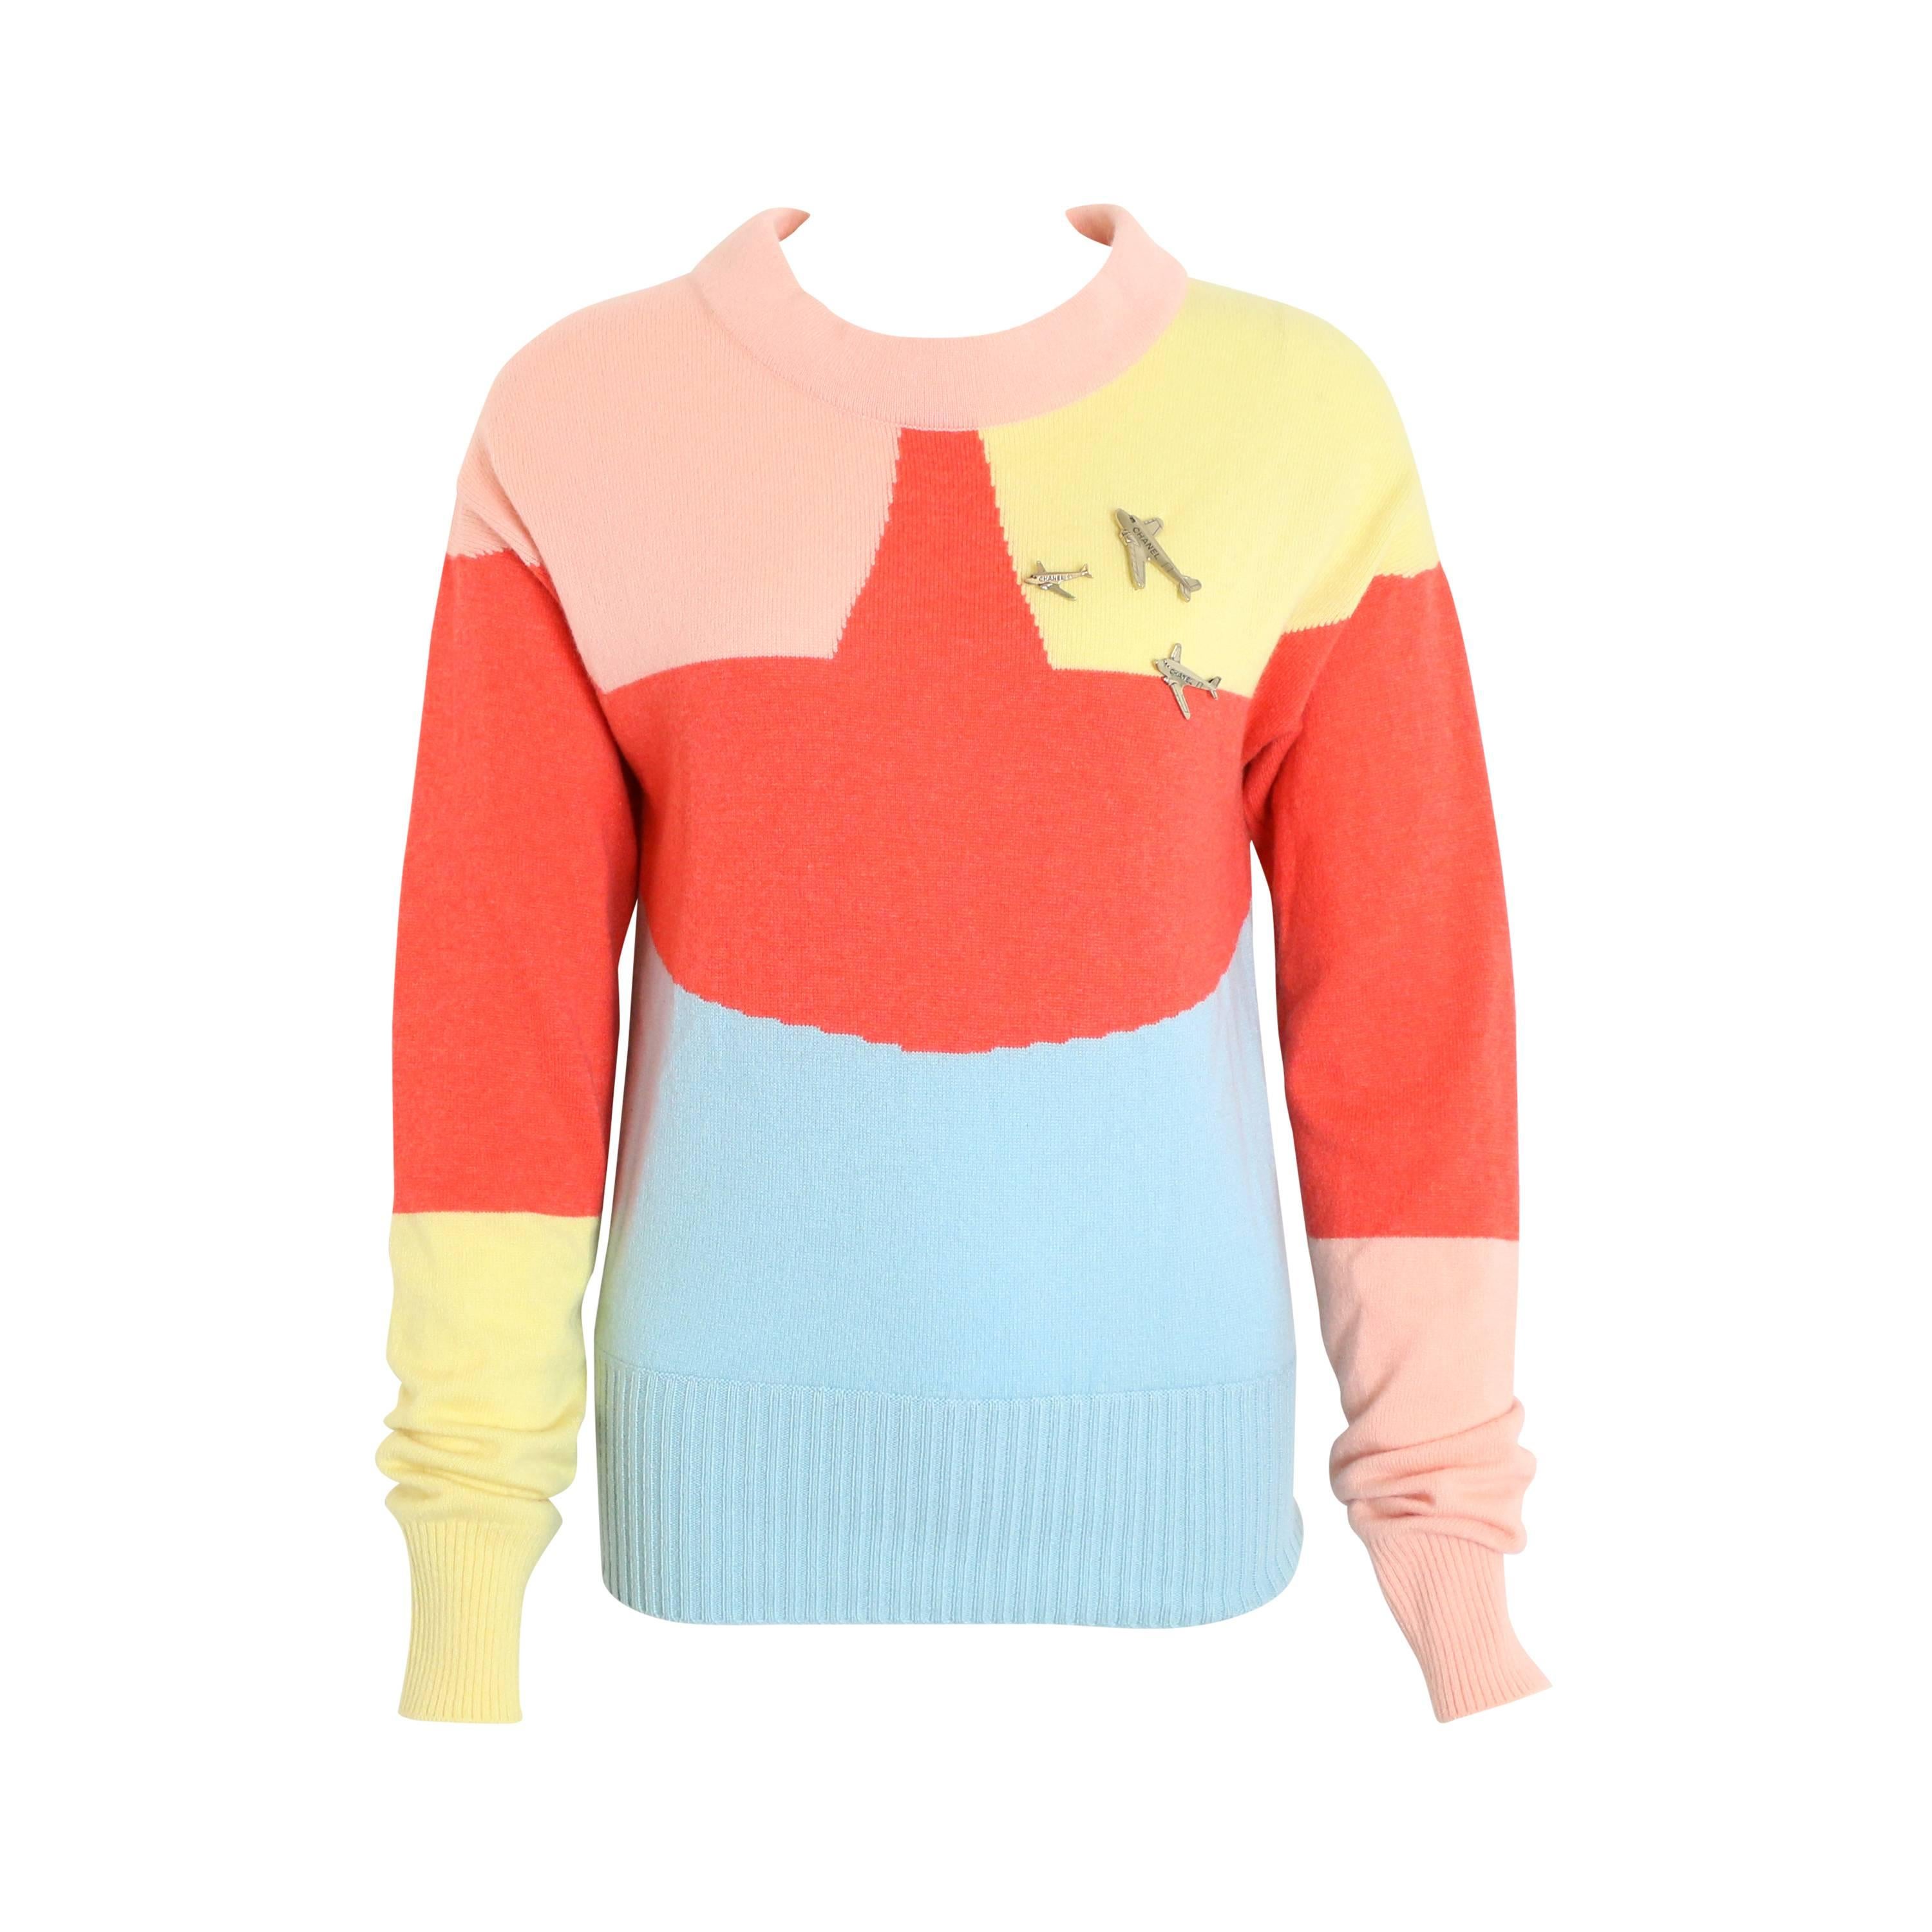 2008 Chanel Colour Blocked Cashmere Sweater